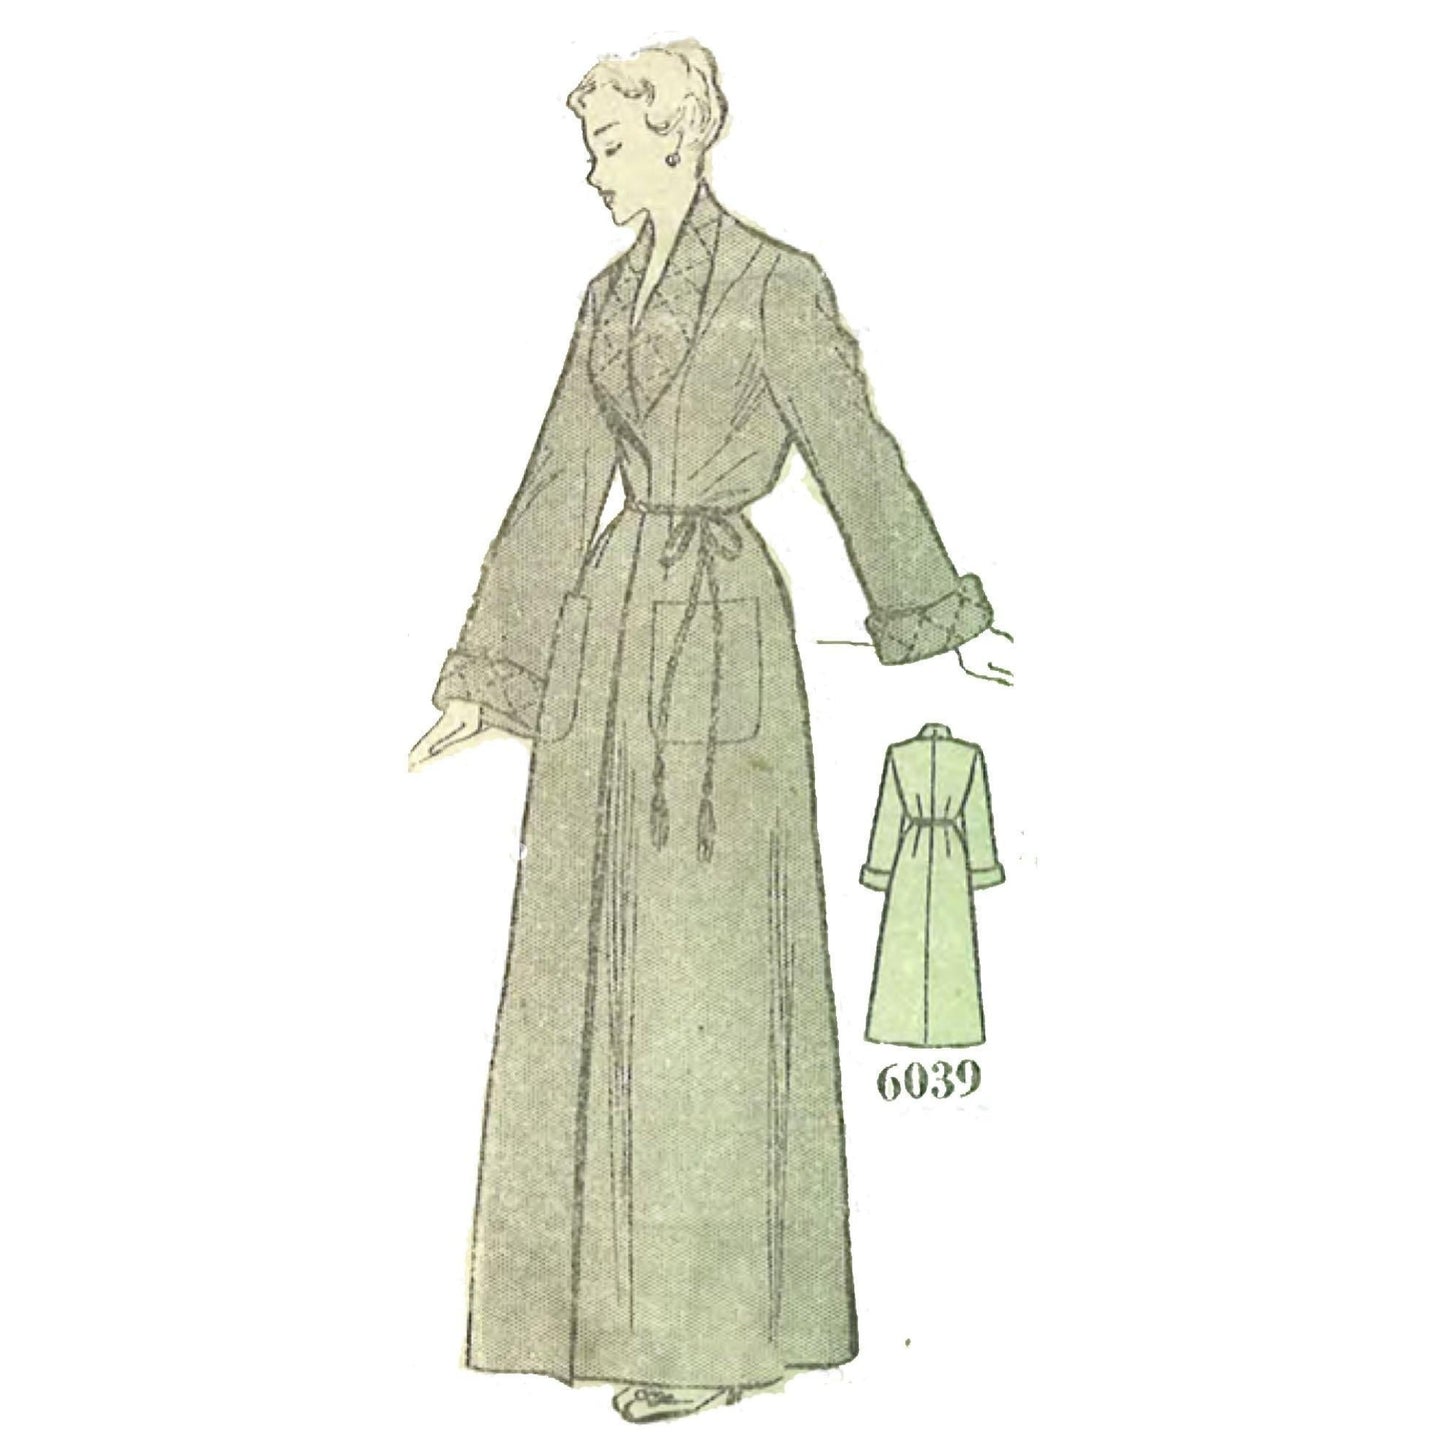 Vintage 1940s Pattern, Women's Dressing Gown Robe, Housecoat PDF Download - Vintage Sewing Pattern Company